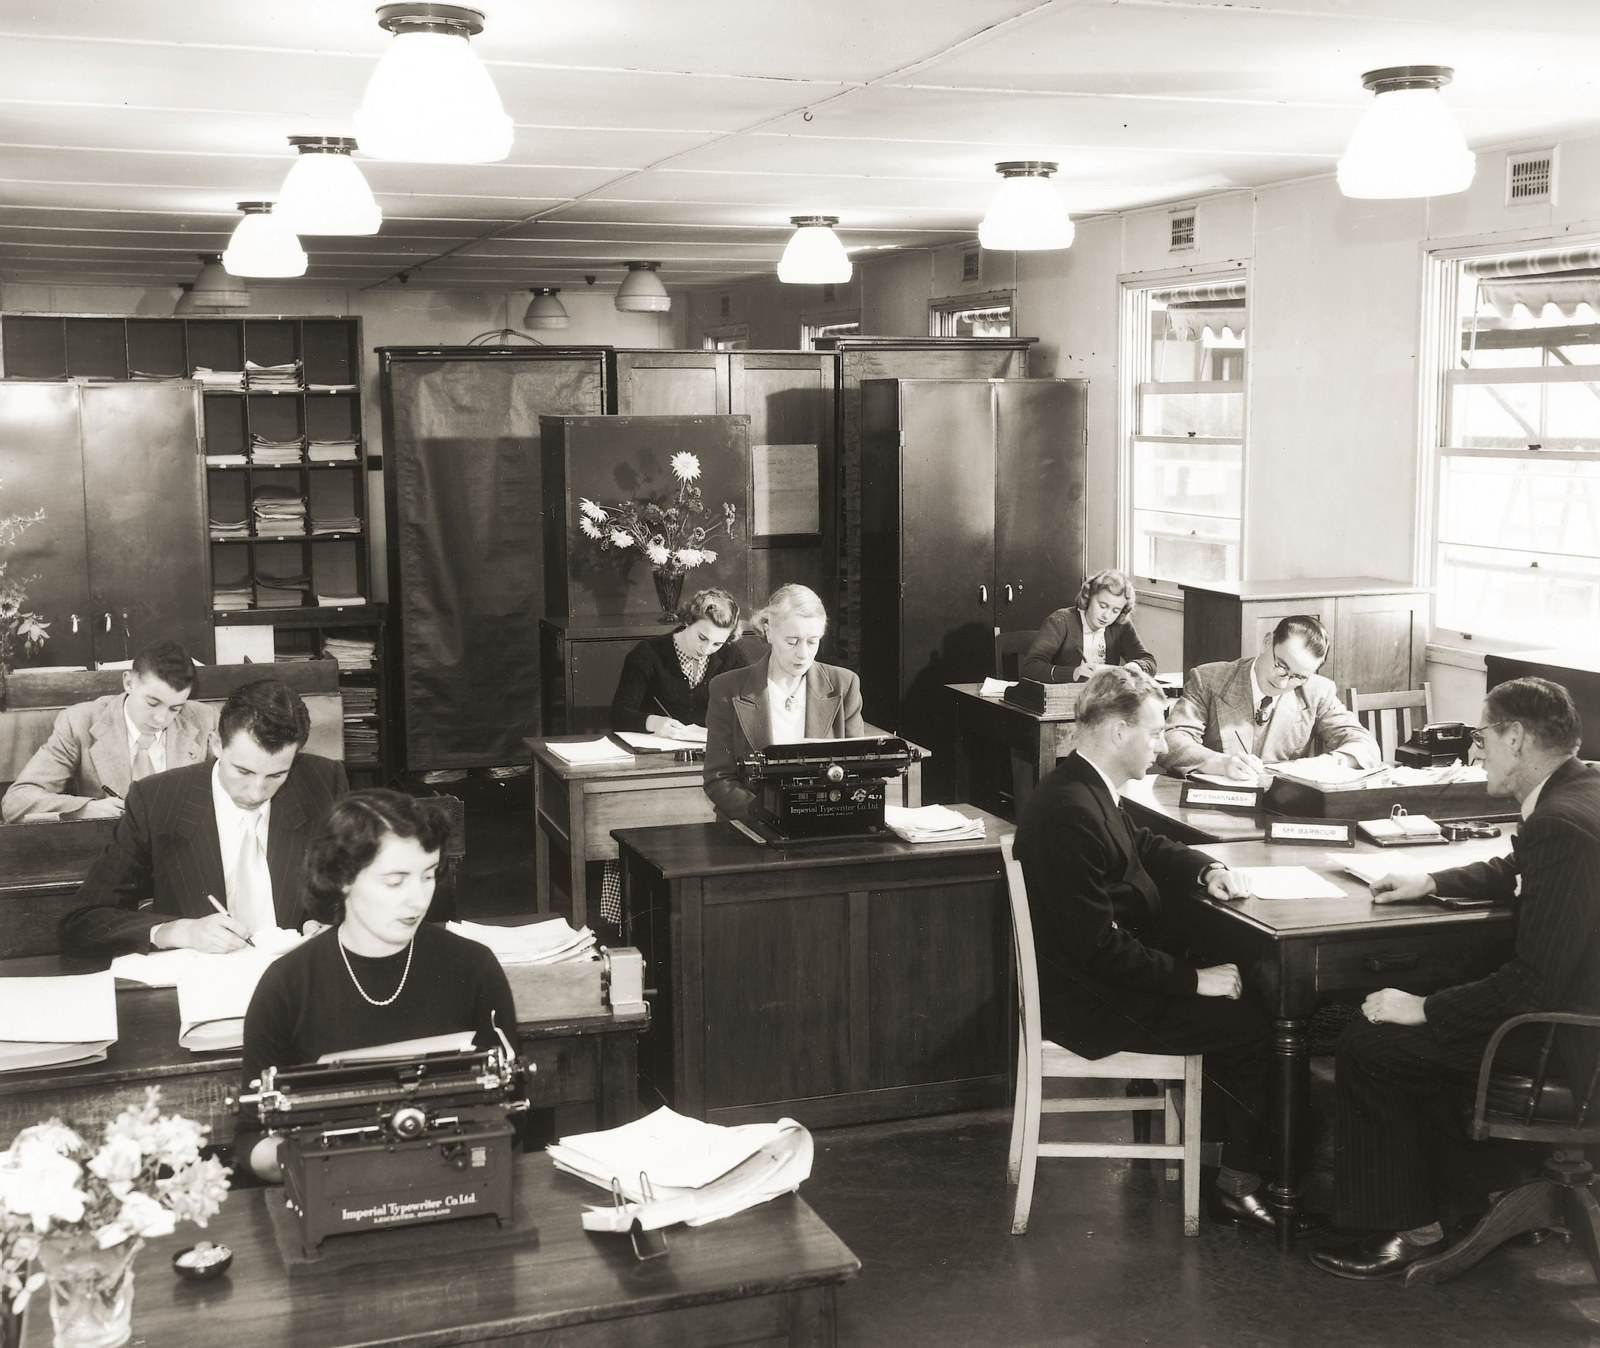 Office with several women on typewriters and men working at desks on paperwork. The room is filled with heavy office furniture, low ceiling and rows of lights.